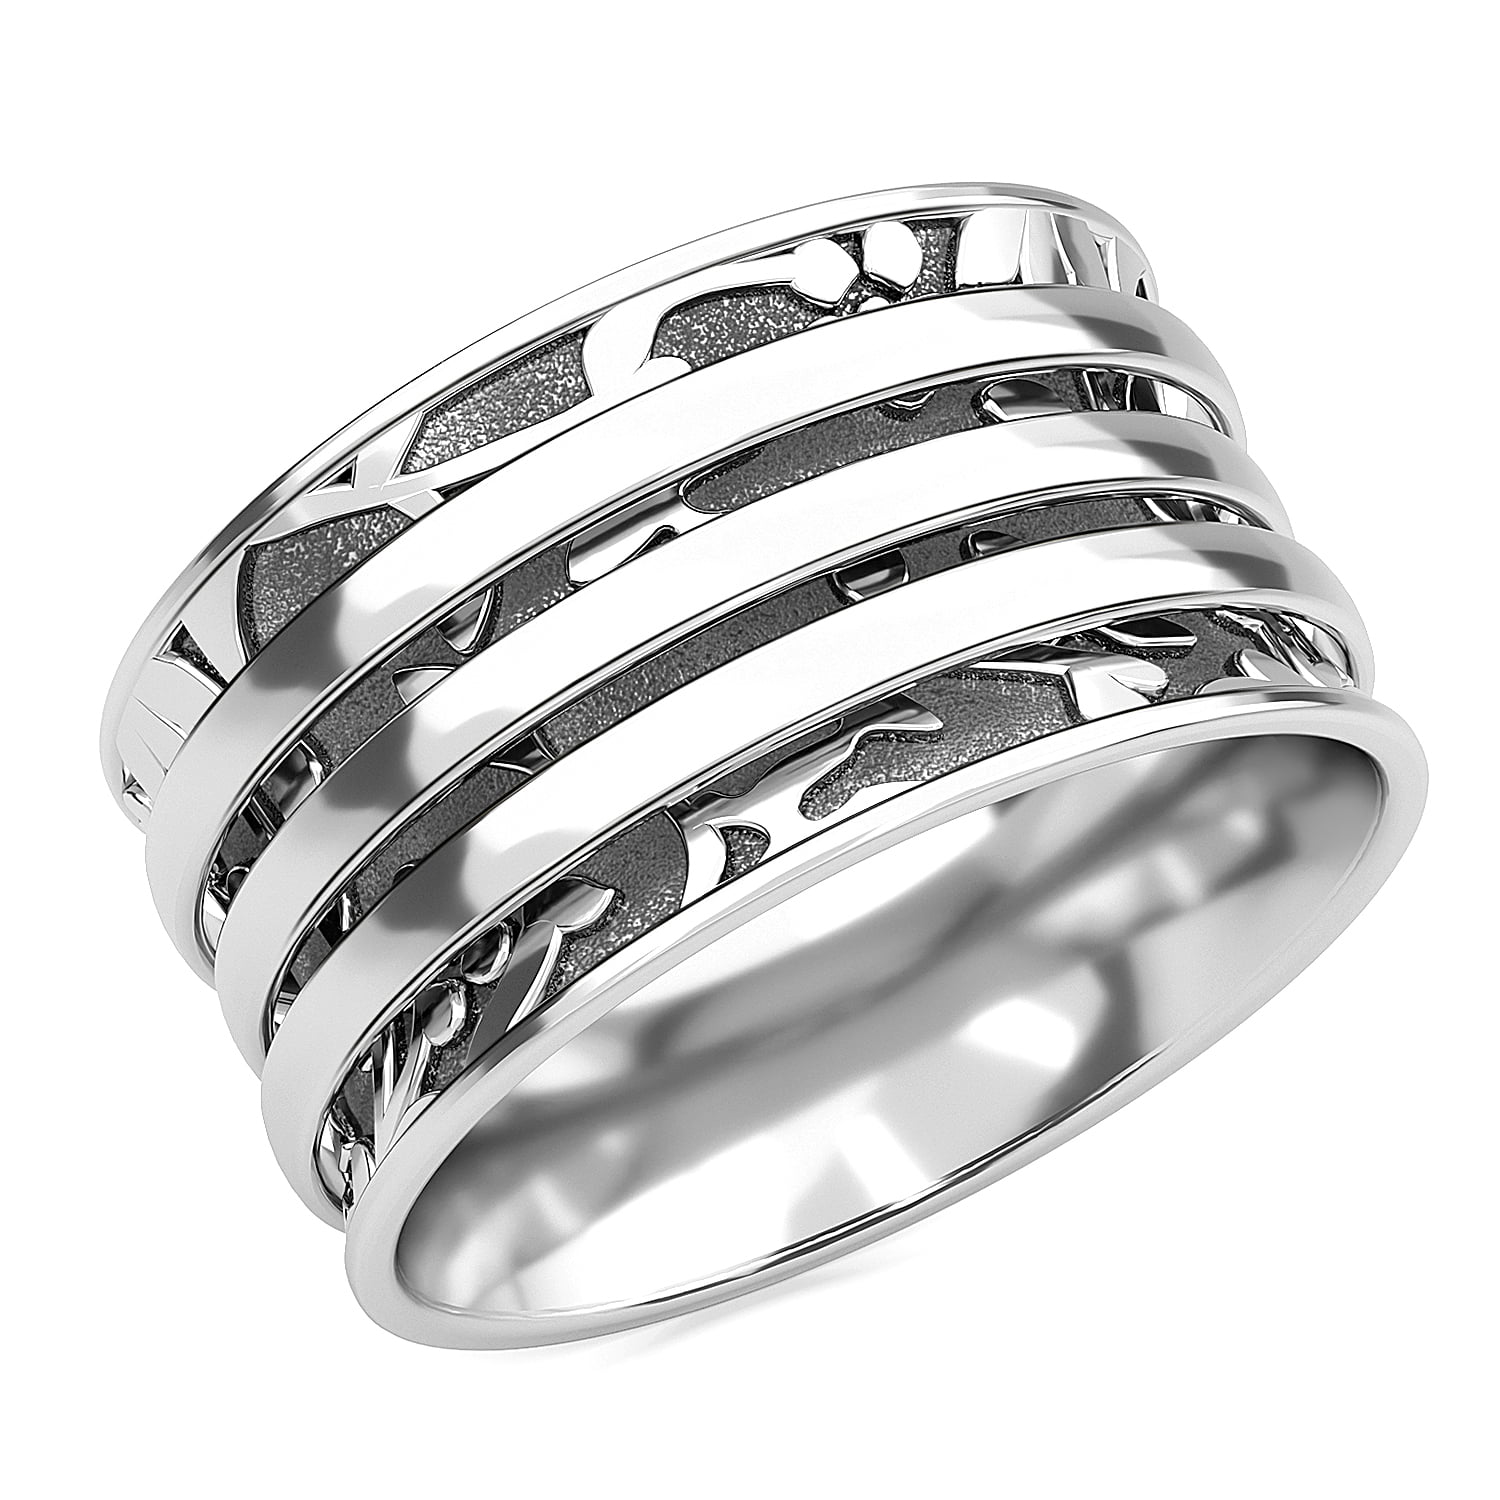 925 Sterling Silver Band Spinner Ring Jewelry Meditation Handmade All Size T-11 